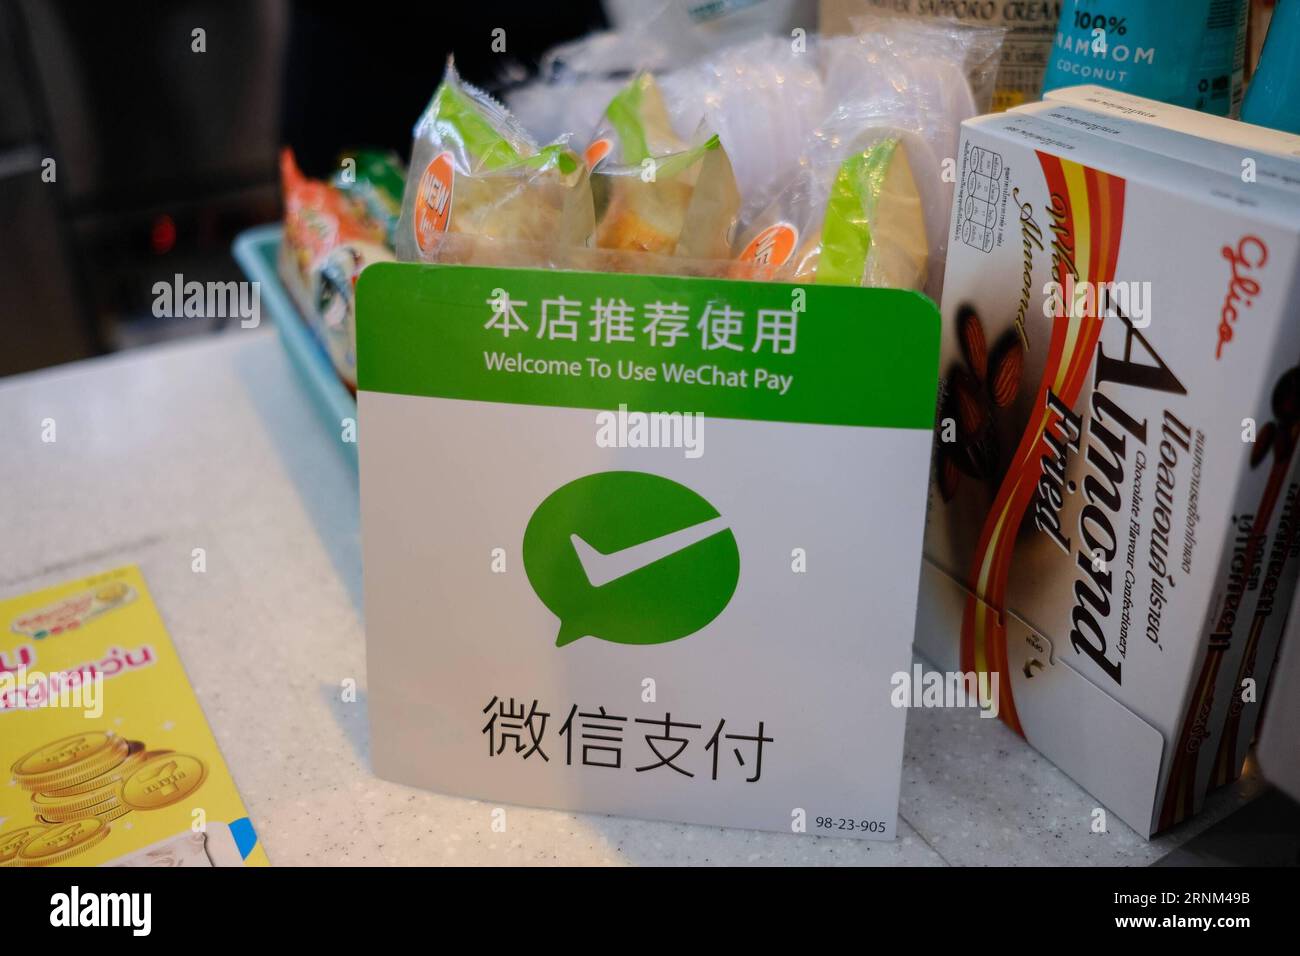 (170508) -- BEIJING, May 8, 2017 -- A plate of Wechat Pay is shown at the counter of a store in Bangkok, Thailand, May 5, 2017. It is a common thing in China to take no cash and pay with a smartphone, which is installed with China s Alipay or Wechat apps. With a smartphone, people can pay almost everything such as shopping, repairing car, paying a taxi and registering a hospital. In many other countries, payment with Alipay and Wechat is becoming a new trend. Alipay s parent company, Ant Financial Services Group or Ant Financial, has more than 200 million users in 25 countries and regions. Wec Stock Photo